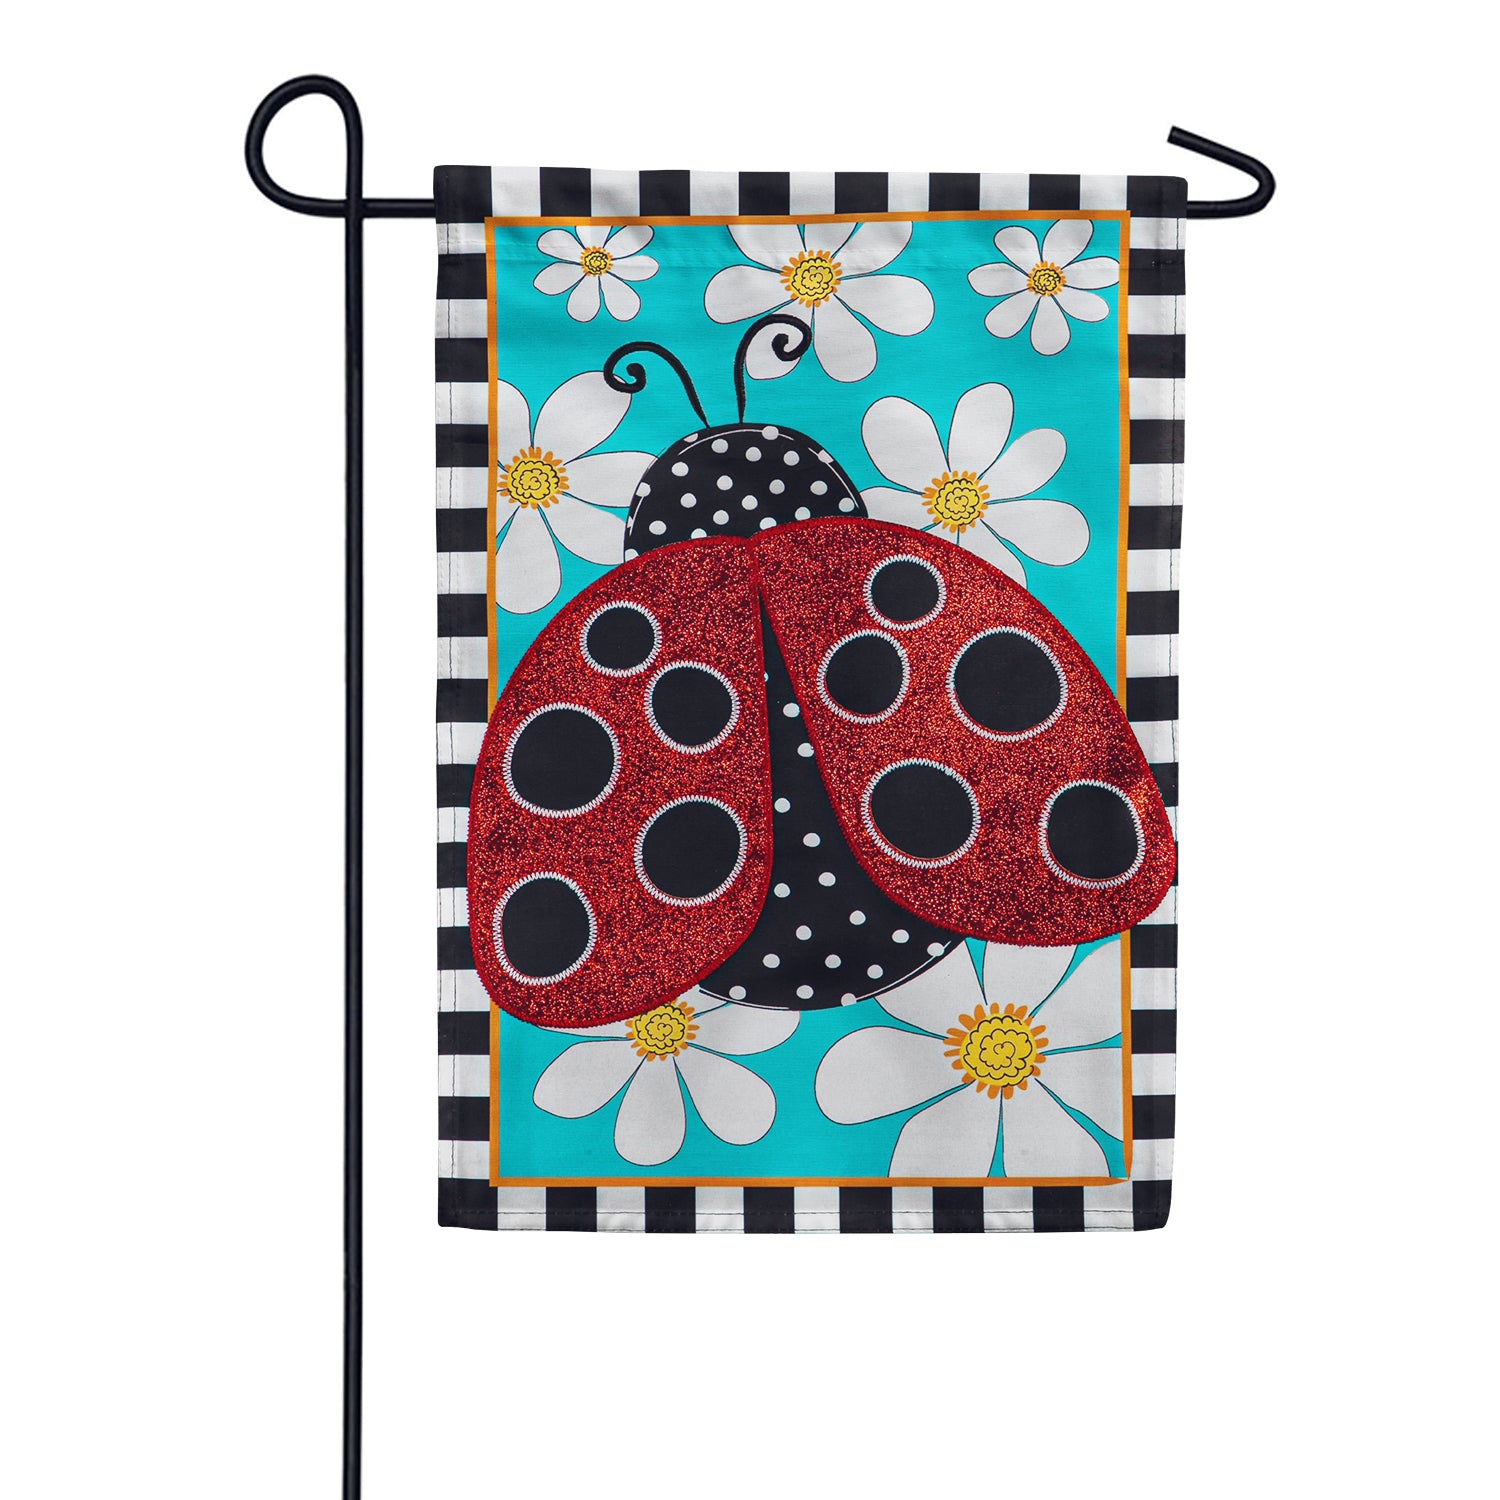 Ladybug with Daisies Appliqued Garden Flag